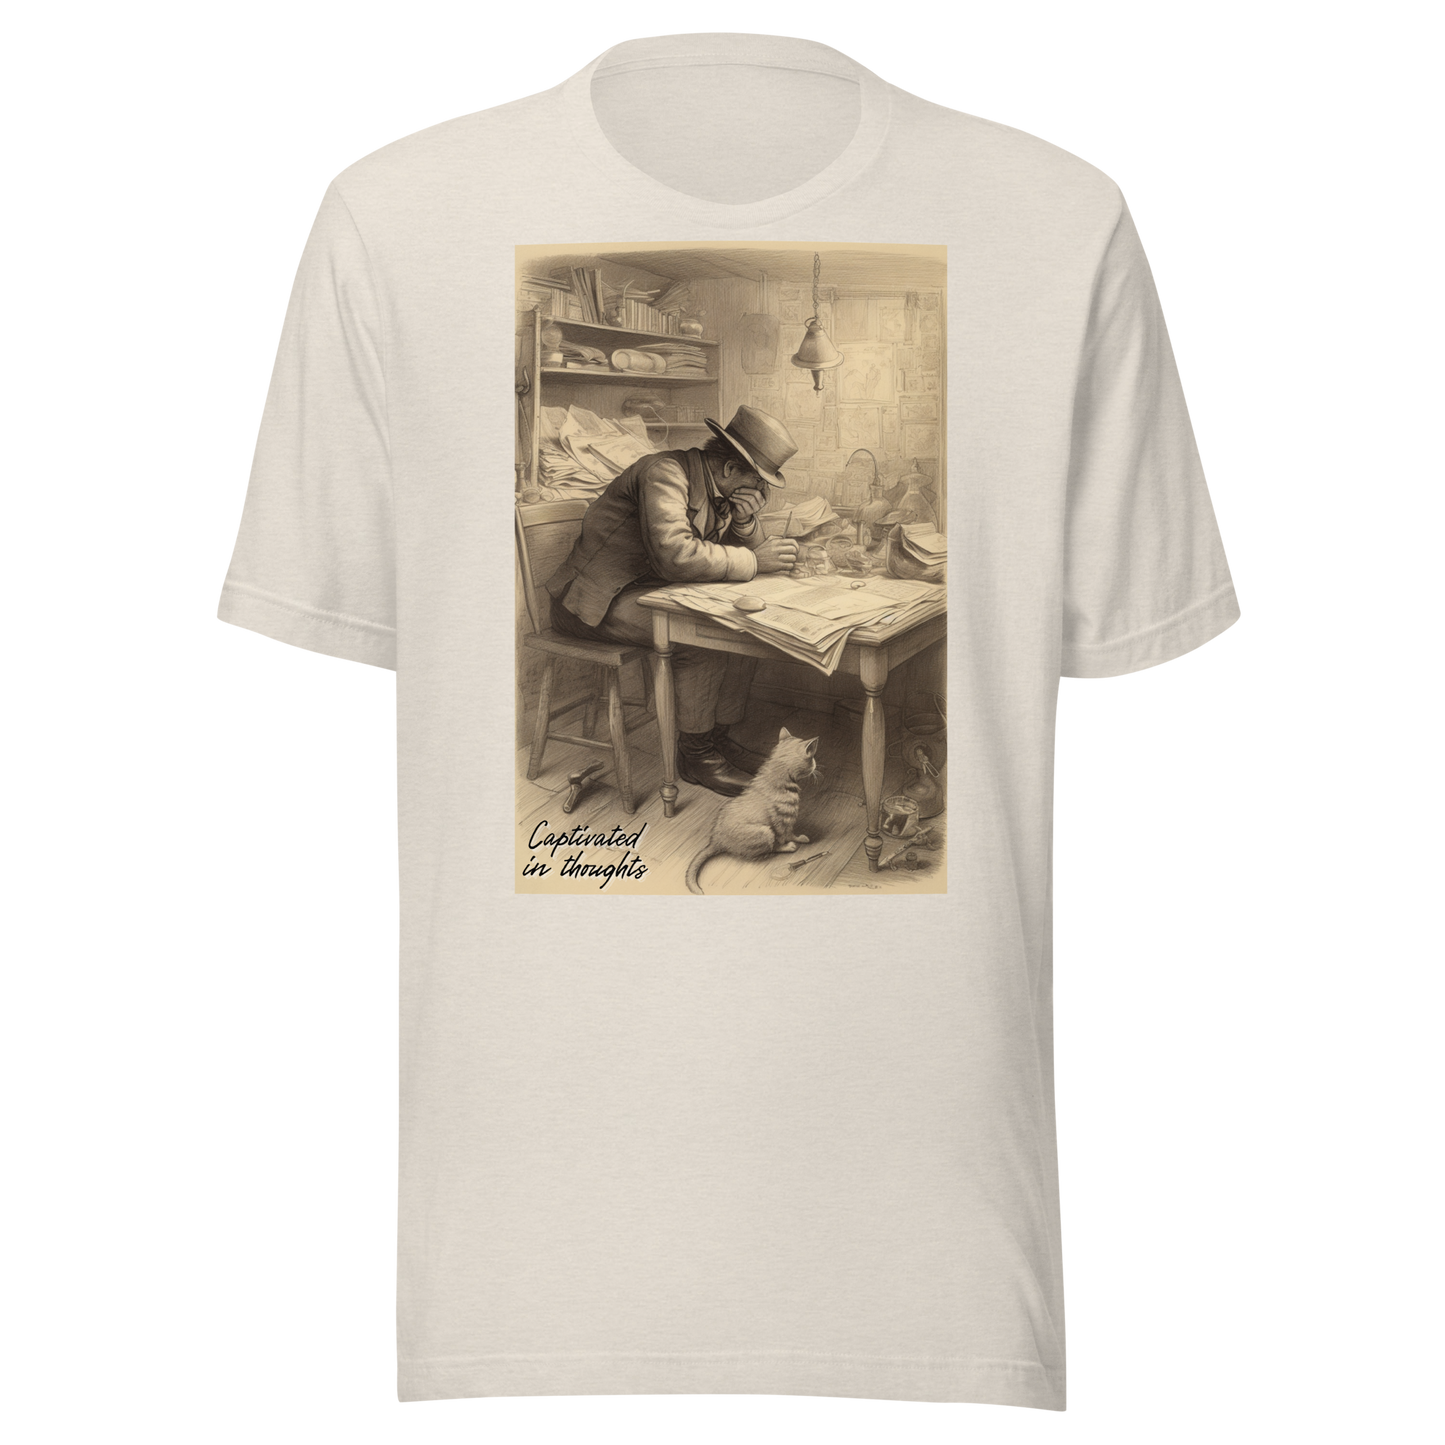 Unisex t-shirt Art Print: The Writer's Companion. Captivated in thoughts